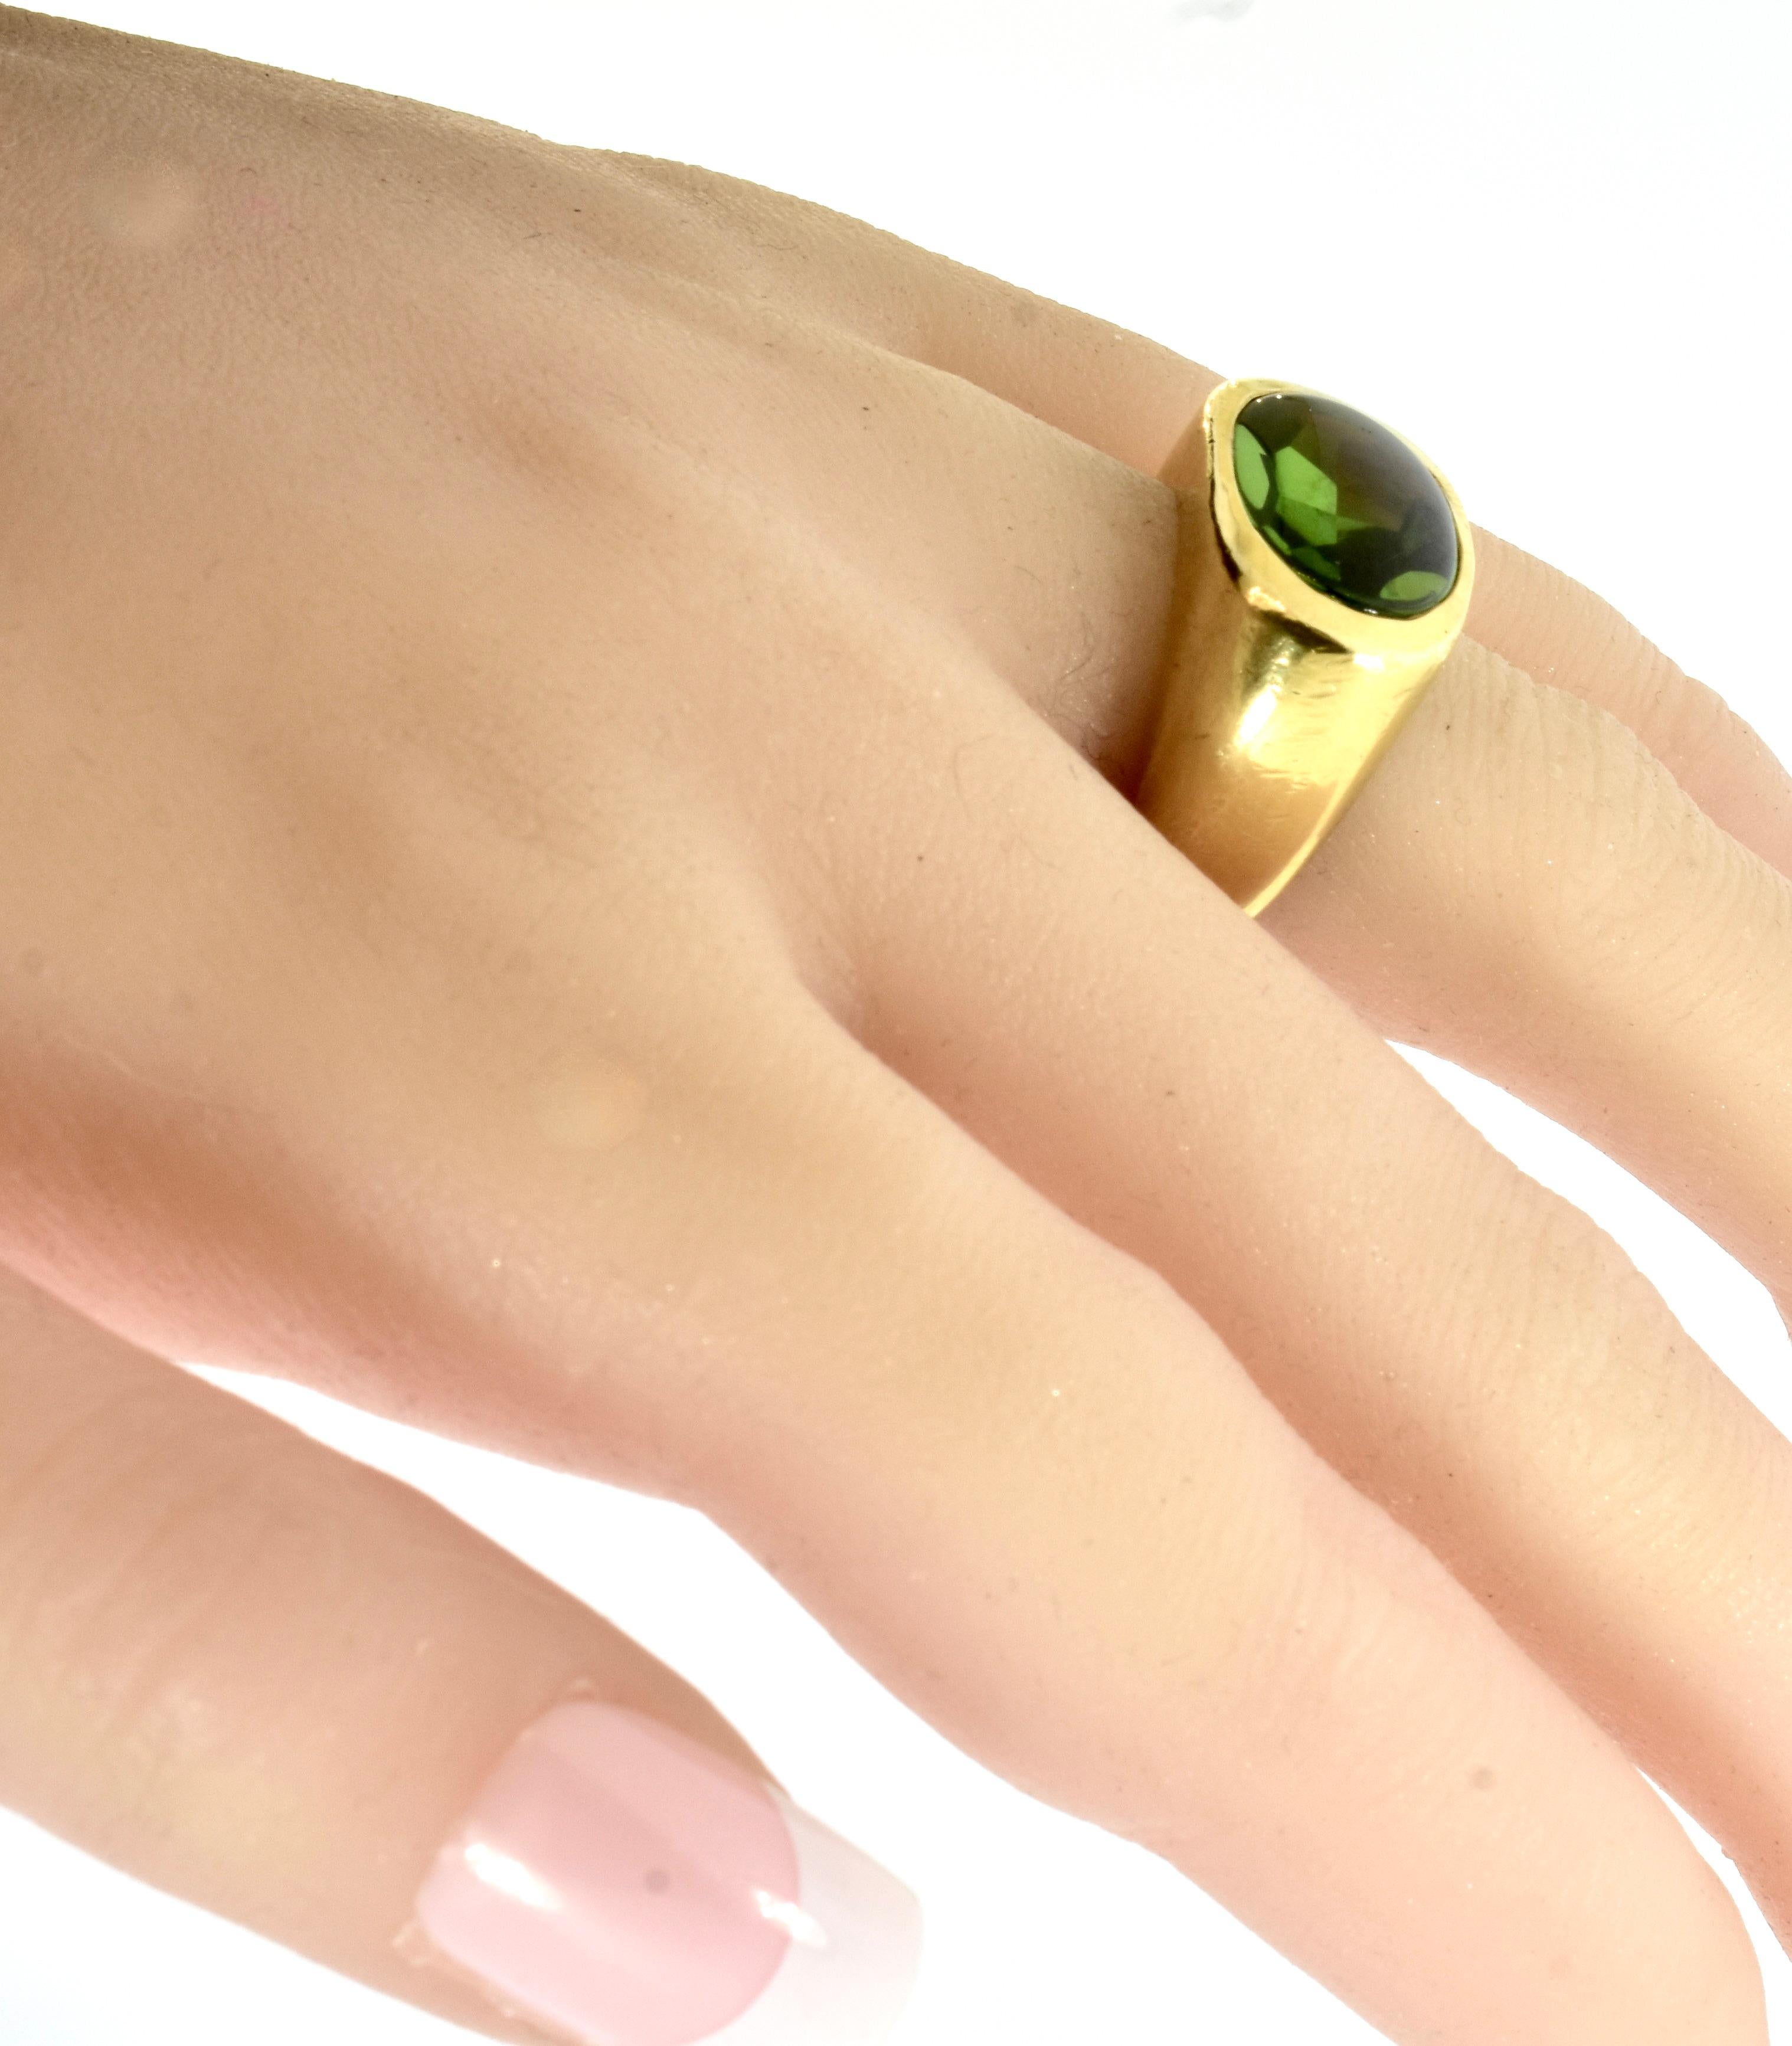 Cabochon  Peridot 8 cts., Very Fine Quality set in an 18K Yellow Gold Vintage Ring For Sale